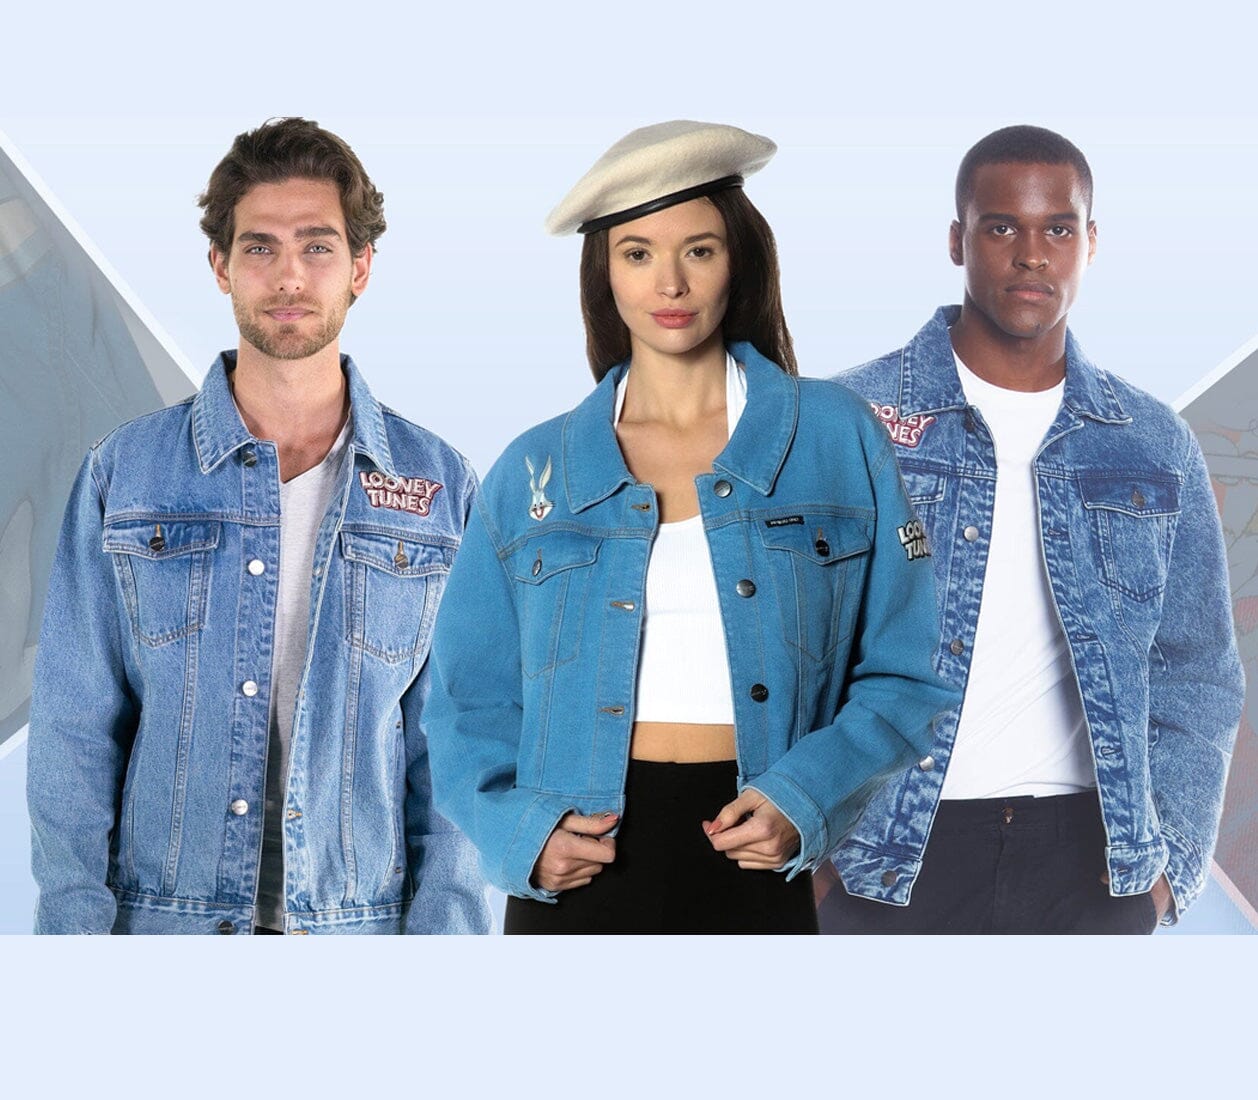 TIPS AND TRICKS FOR STYLING THAT DENIM JACKET PERFECTLY